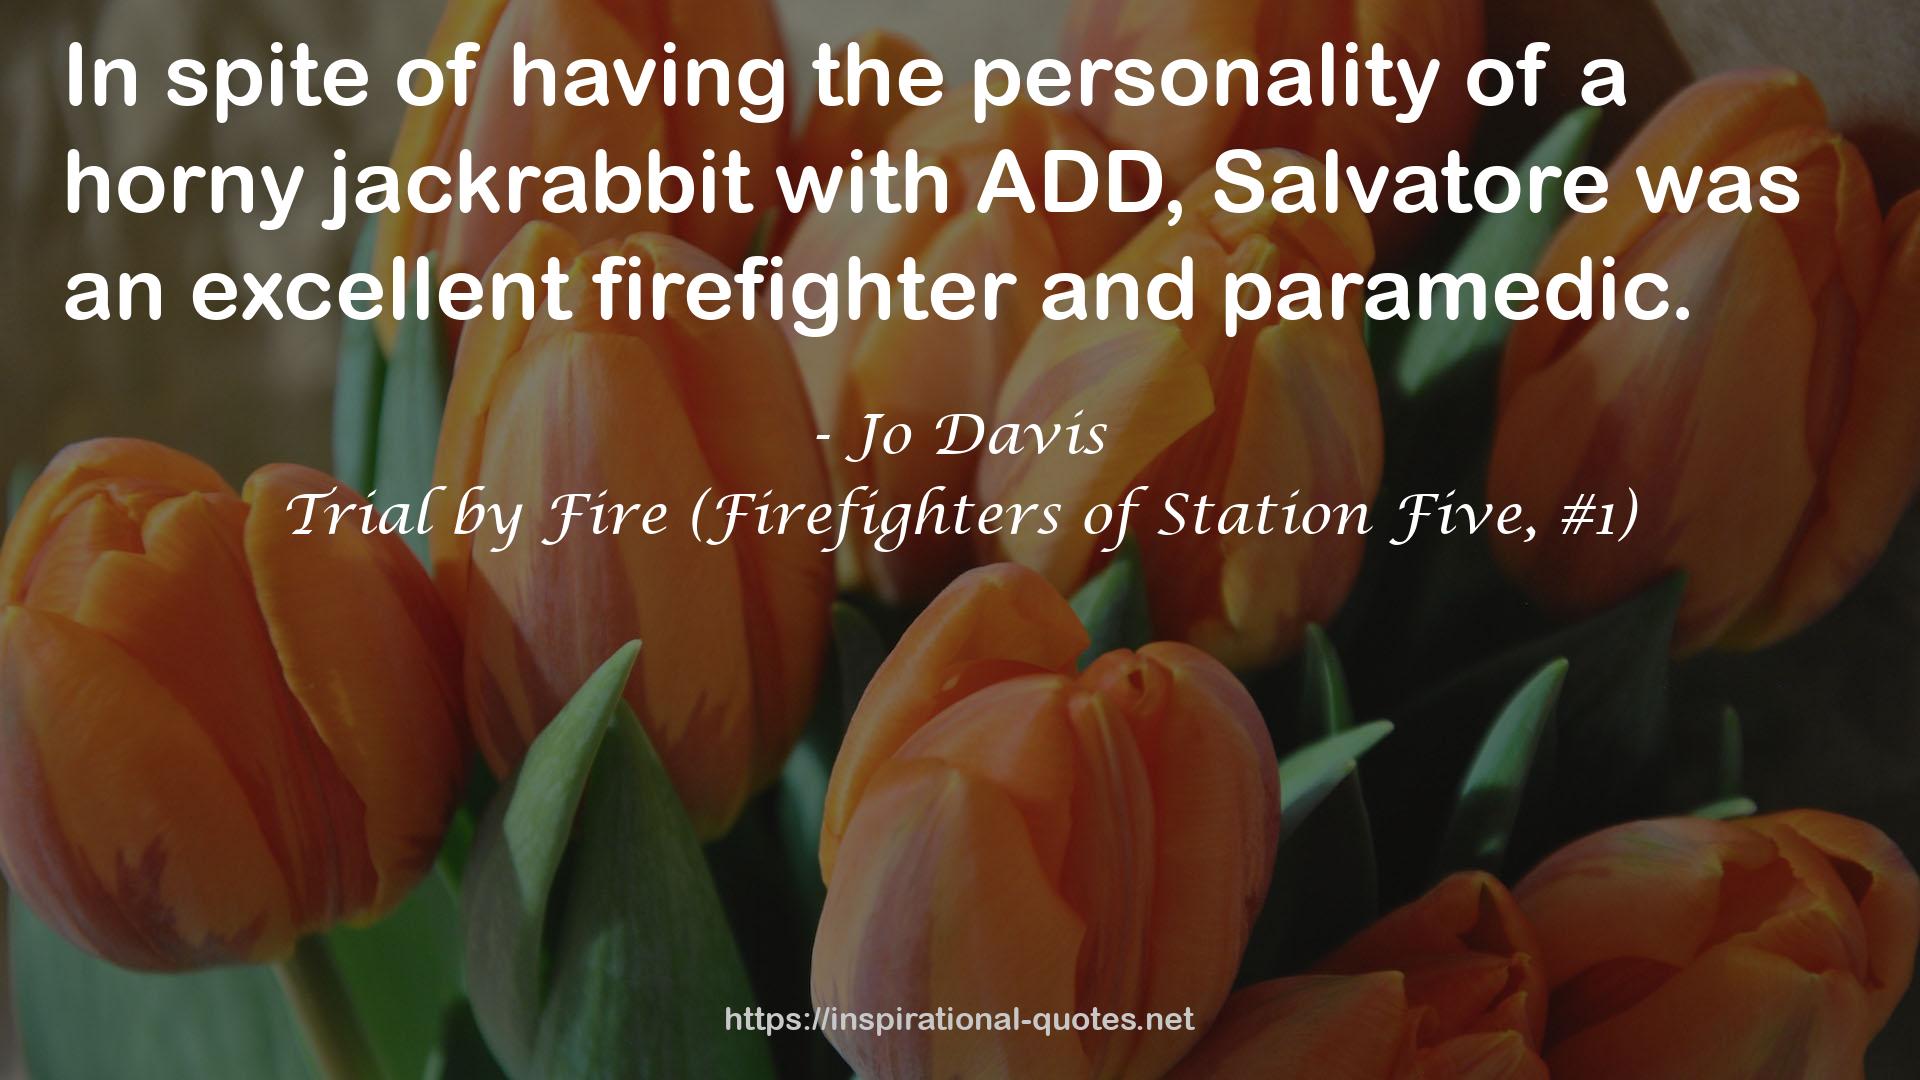 Trial by Fire (Firefighters of Station Five, #1) QUOTES